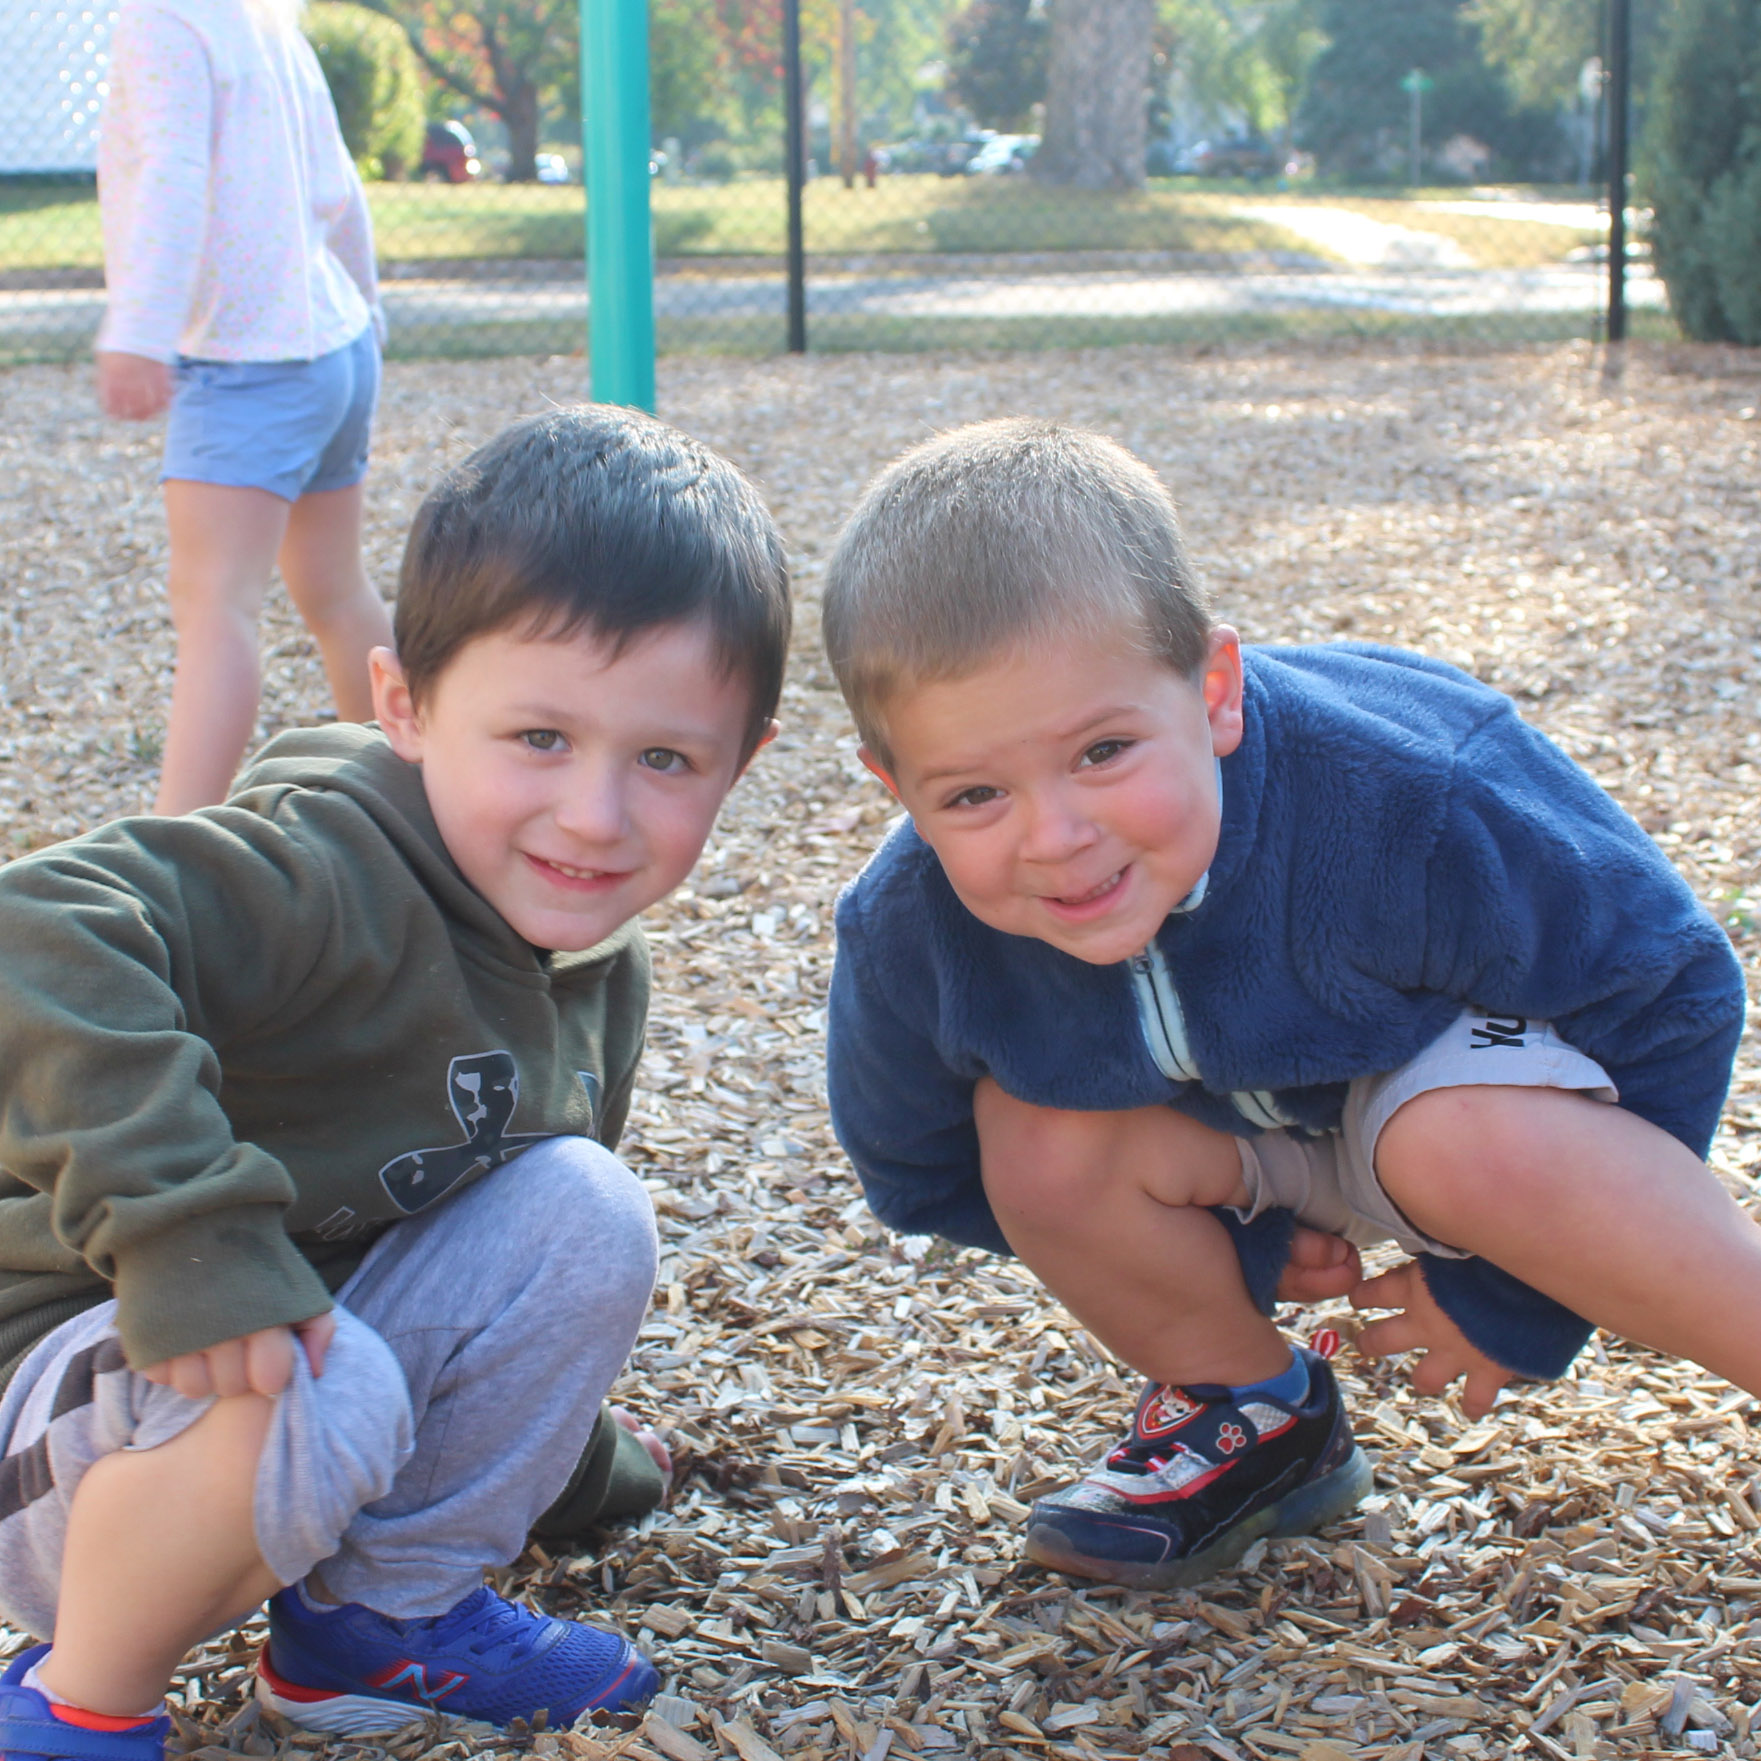 Two children crouch down and smile for a photo while at a playground